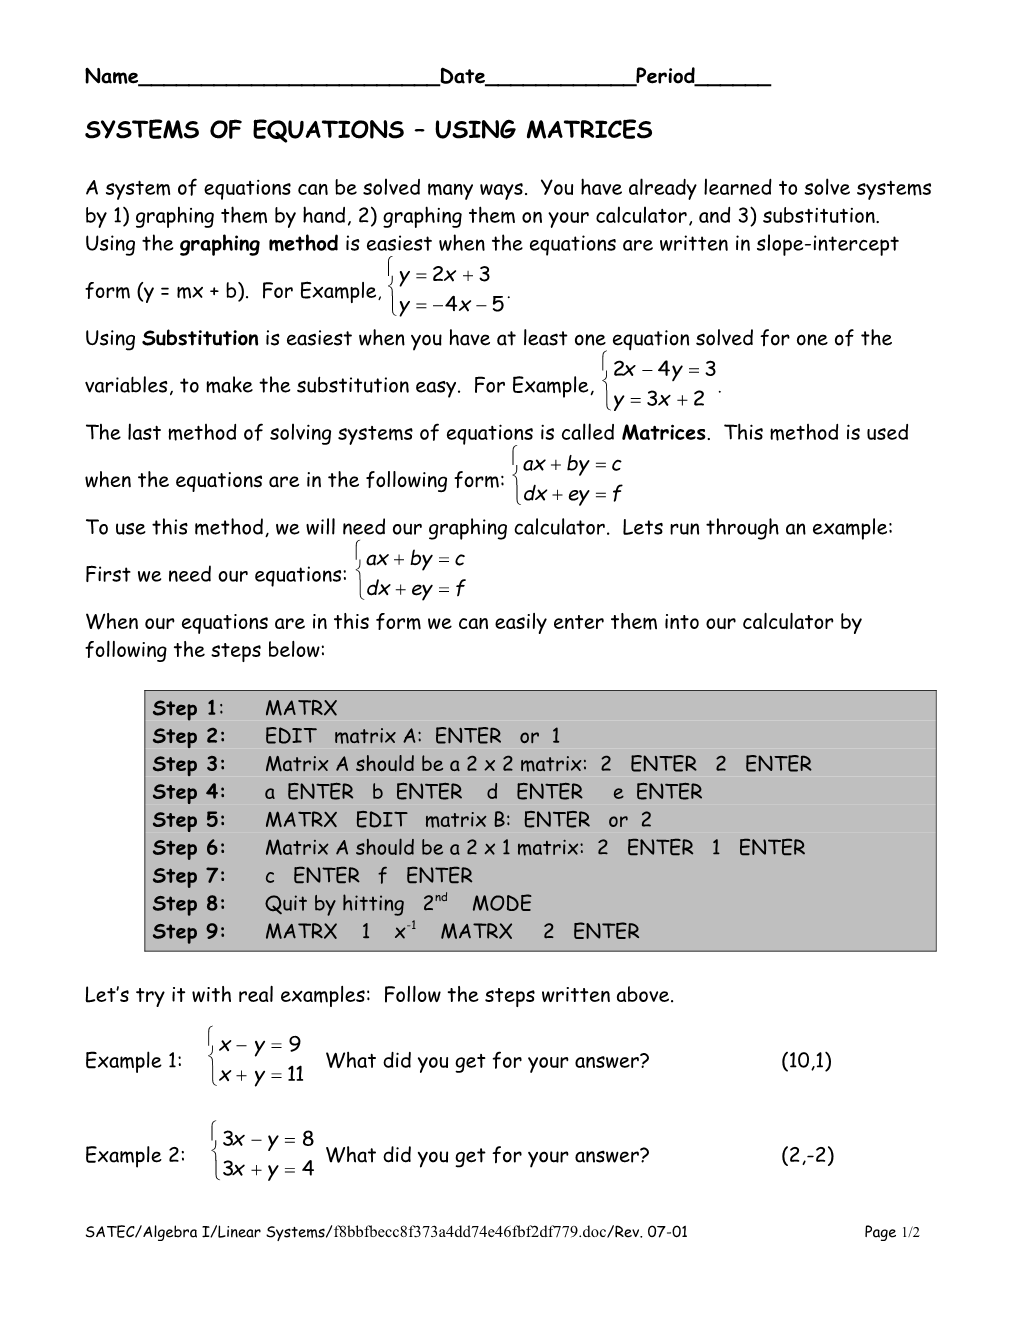 Systems of Equations Using Matrices